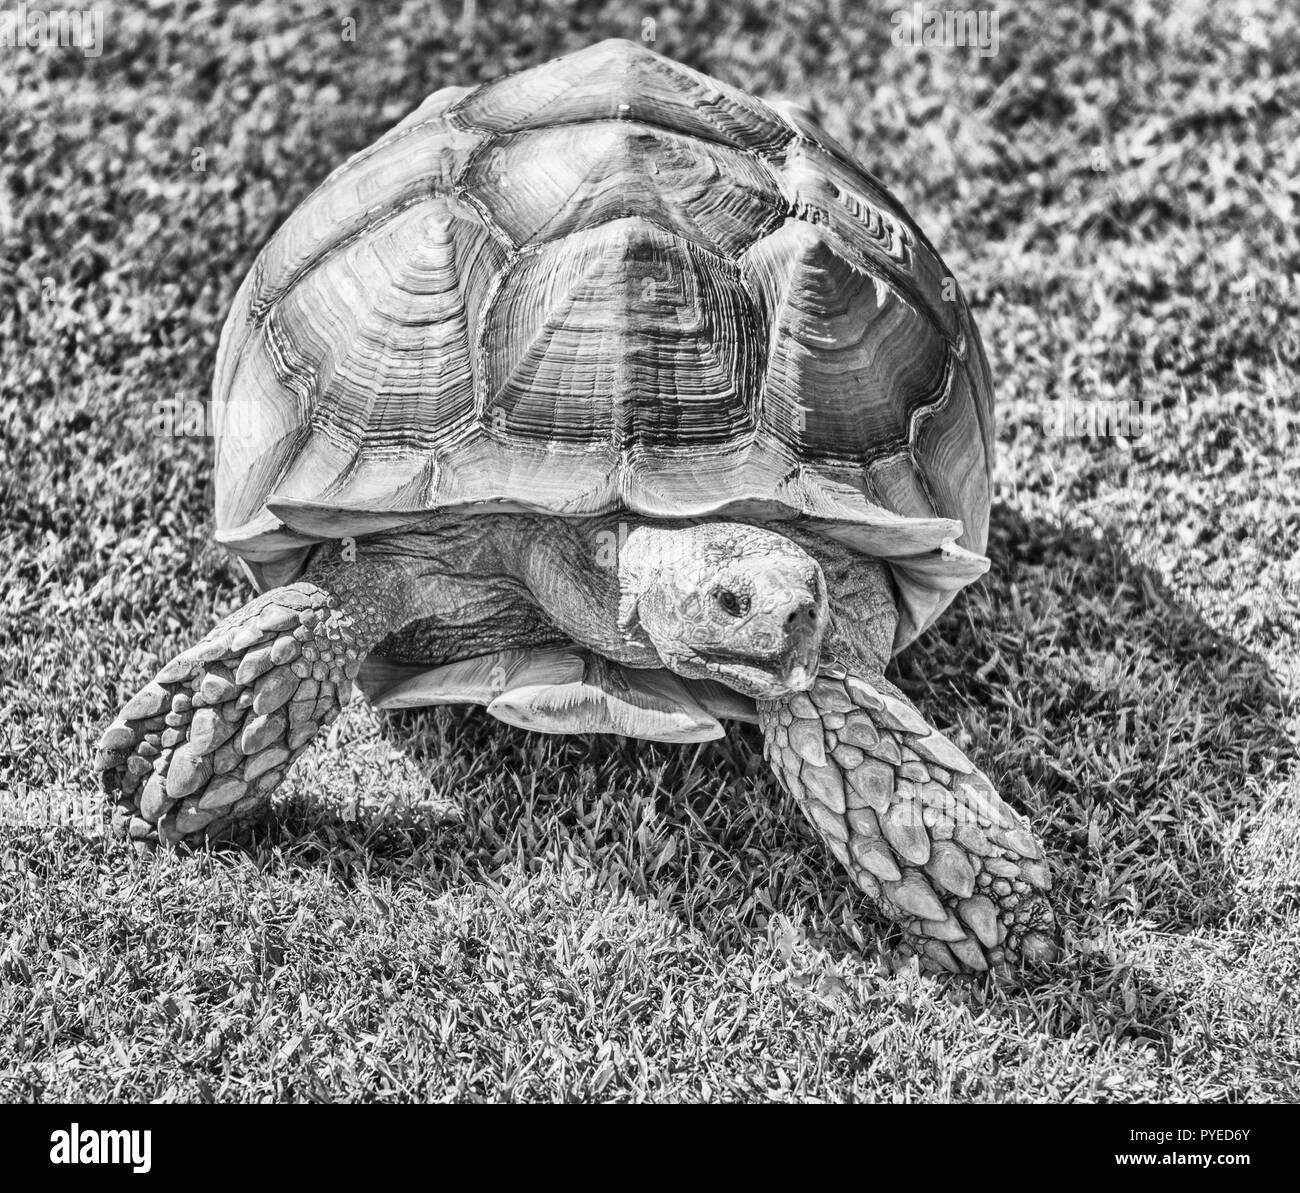 African spurred tortoise also known as sulcata tortoise, land turtle walking on the grass Stock Photo